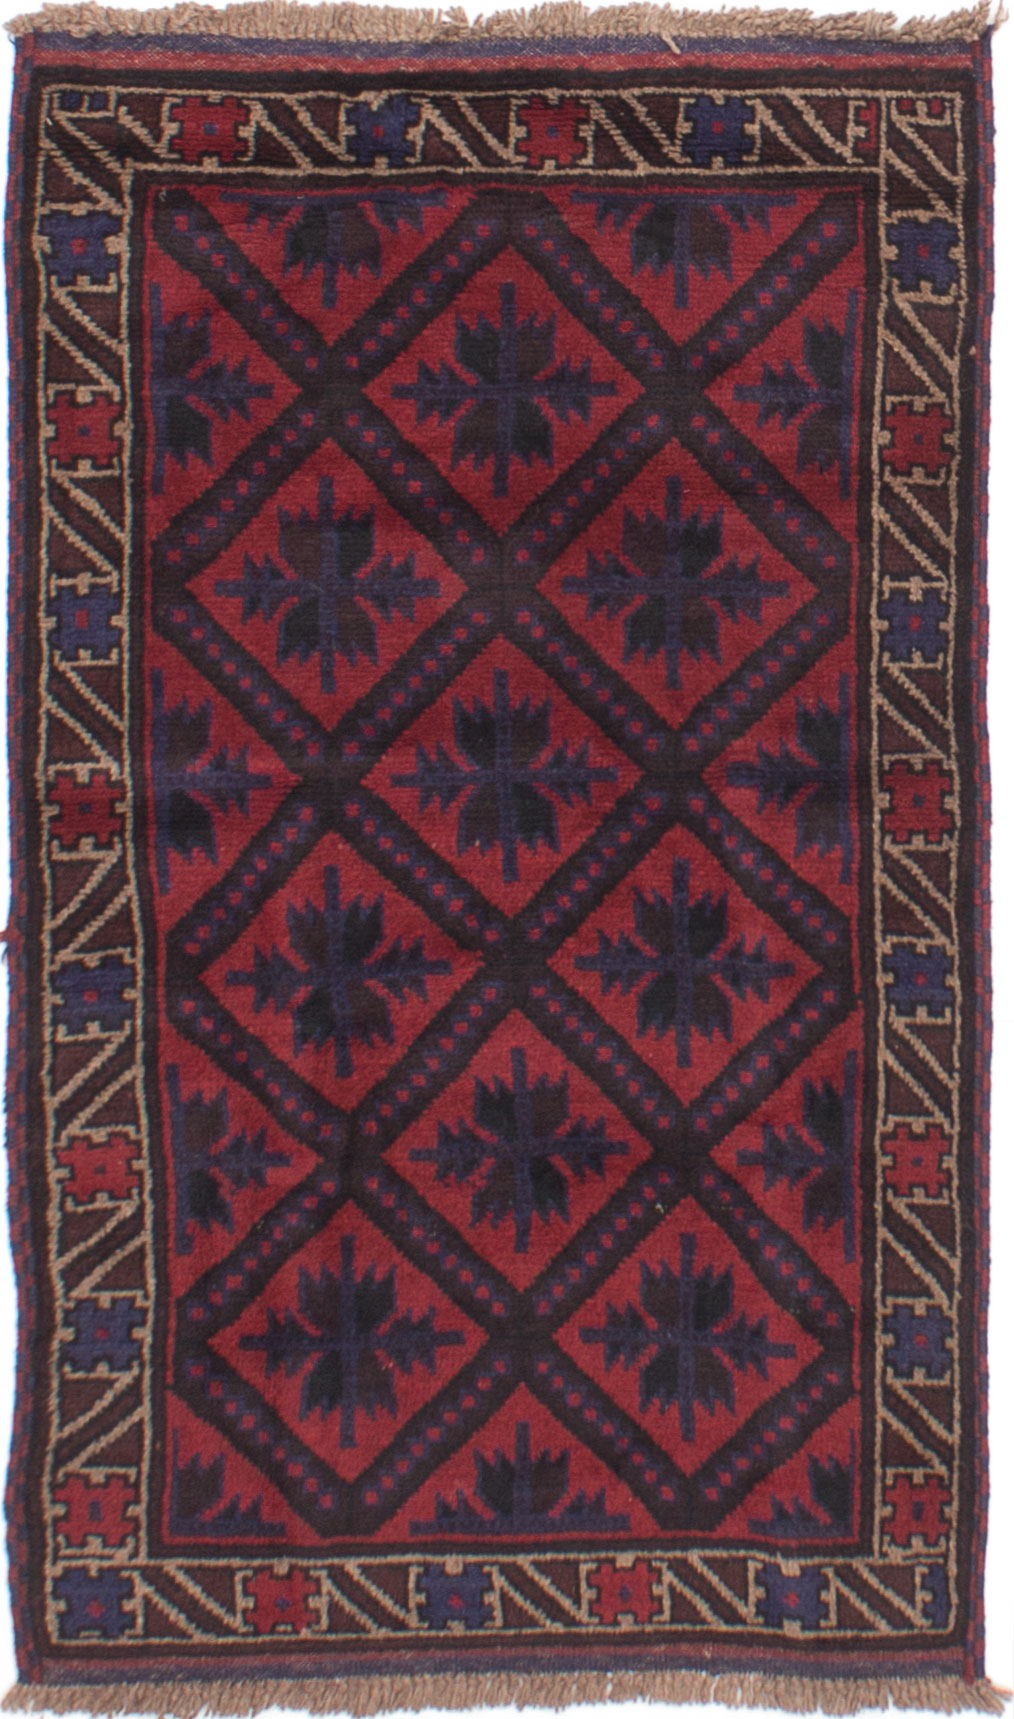 Hand-knotted Finest Rizbaft Dark Red Wool Rug 2'9" x 4'11" Size: 2'9" x 4'11"  